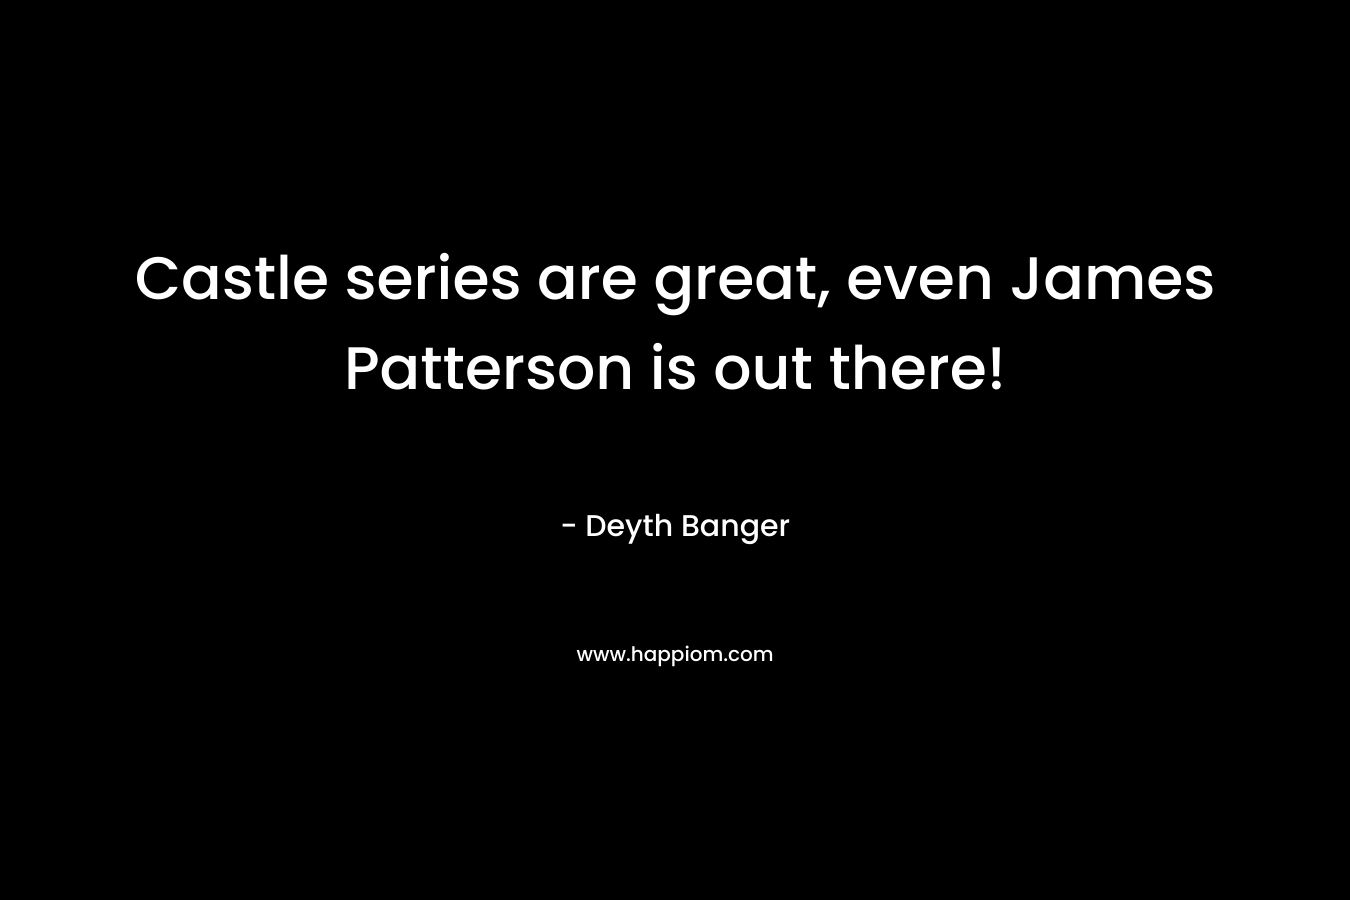 Castle series are great, even James Patterson is out there!